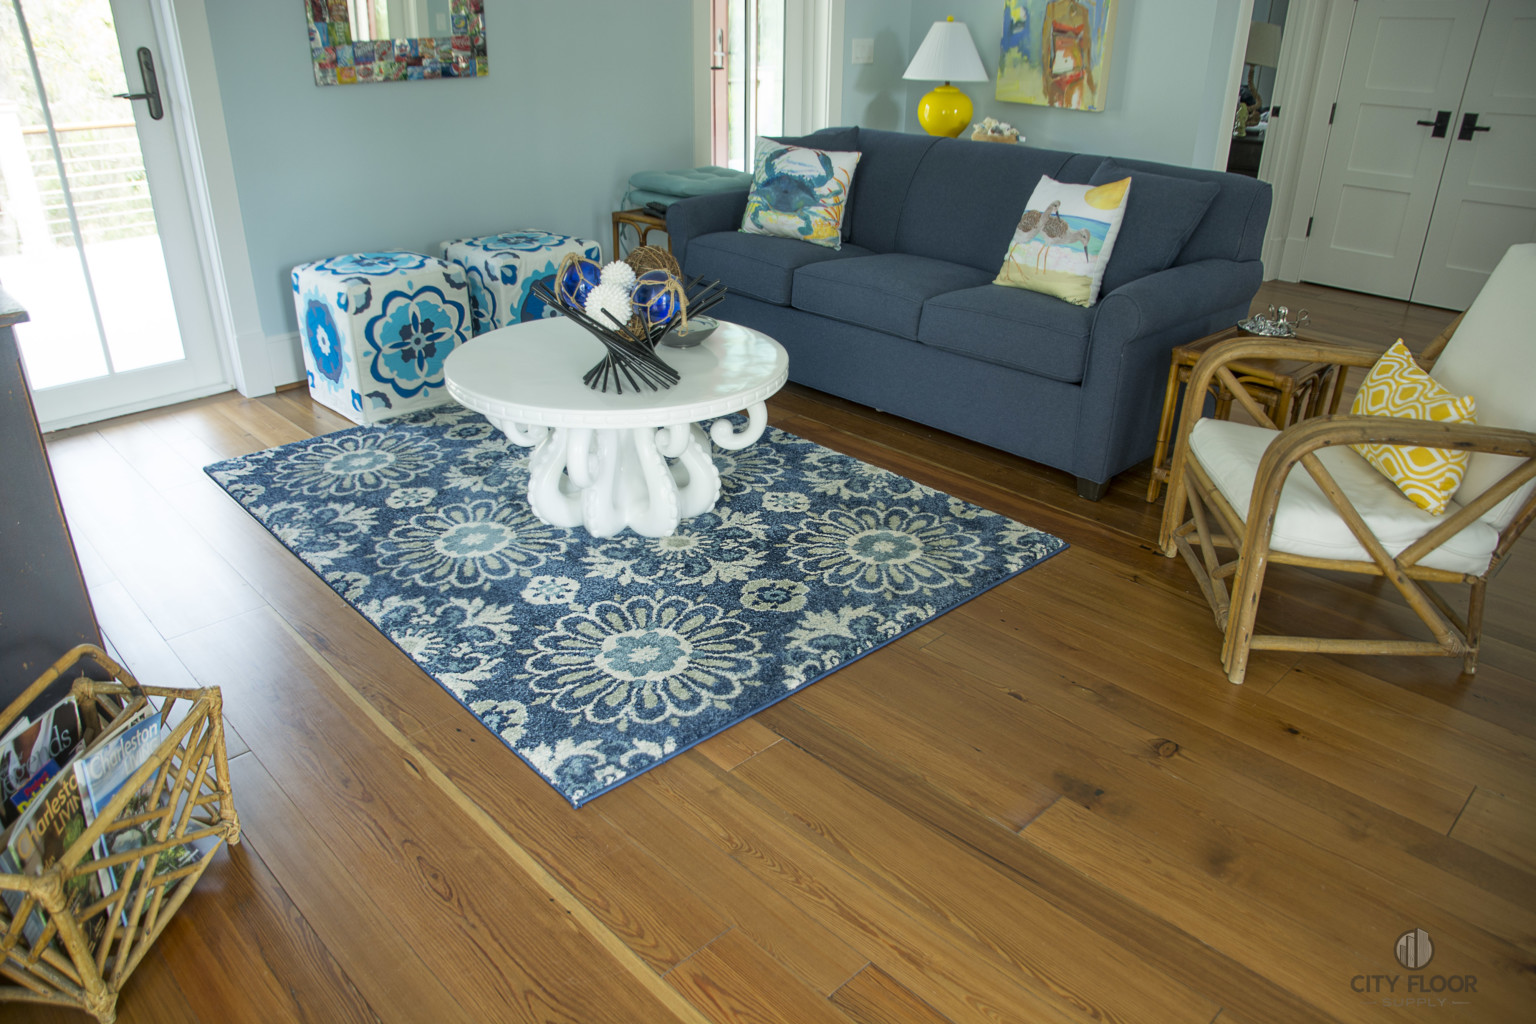 Wide Plank Flooring in Beach House Family Room